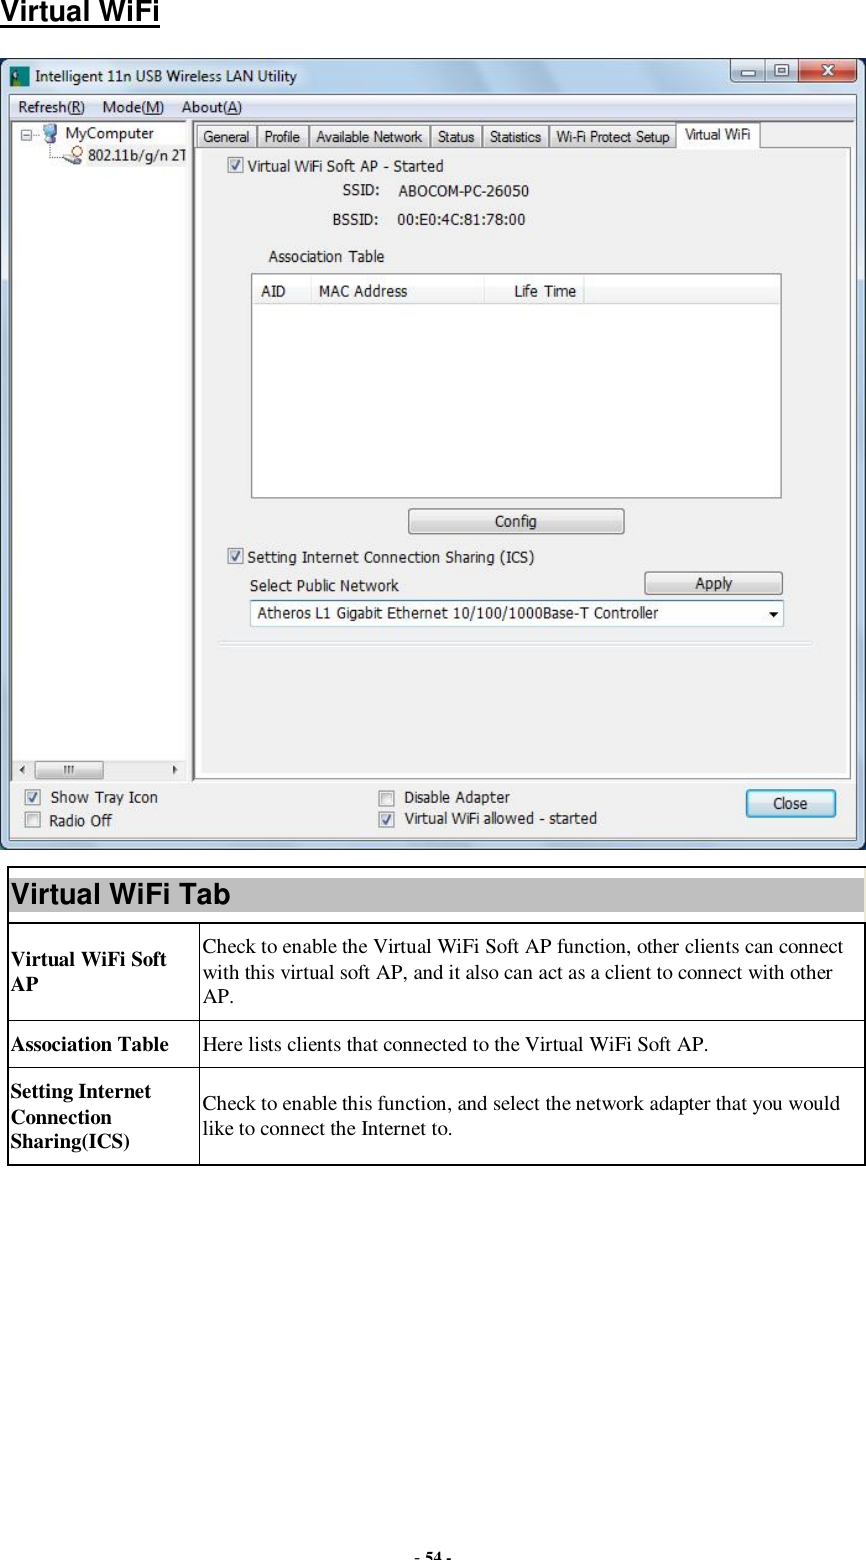  - 54 - Virtual WiFi  Virtual WiFi Tab Virtual WiFi Soft AP Check to enable the Virtual WiFi Soft AP function, other clients can connect with this virtual soft AP, and it also can act as a client to connect with other AP. Association Table  Here lists clients that connected to the Virtual WiFi Soft AP. Setting Internet Connection Sharing(ICS) Check to enable this function, and select the network adapter that you would like to connect the Internet to.         